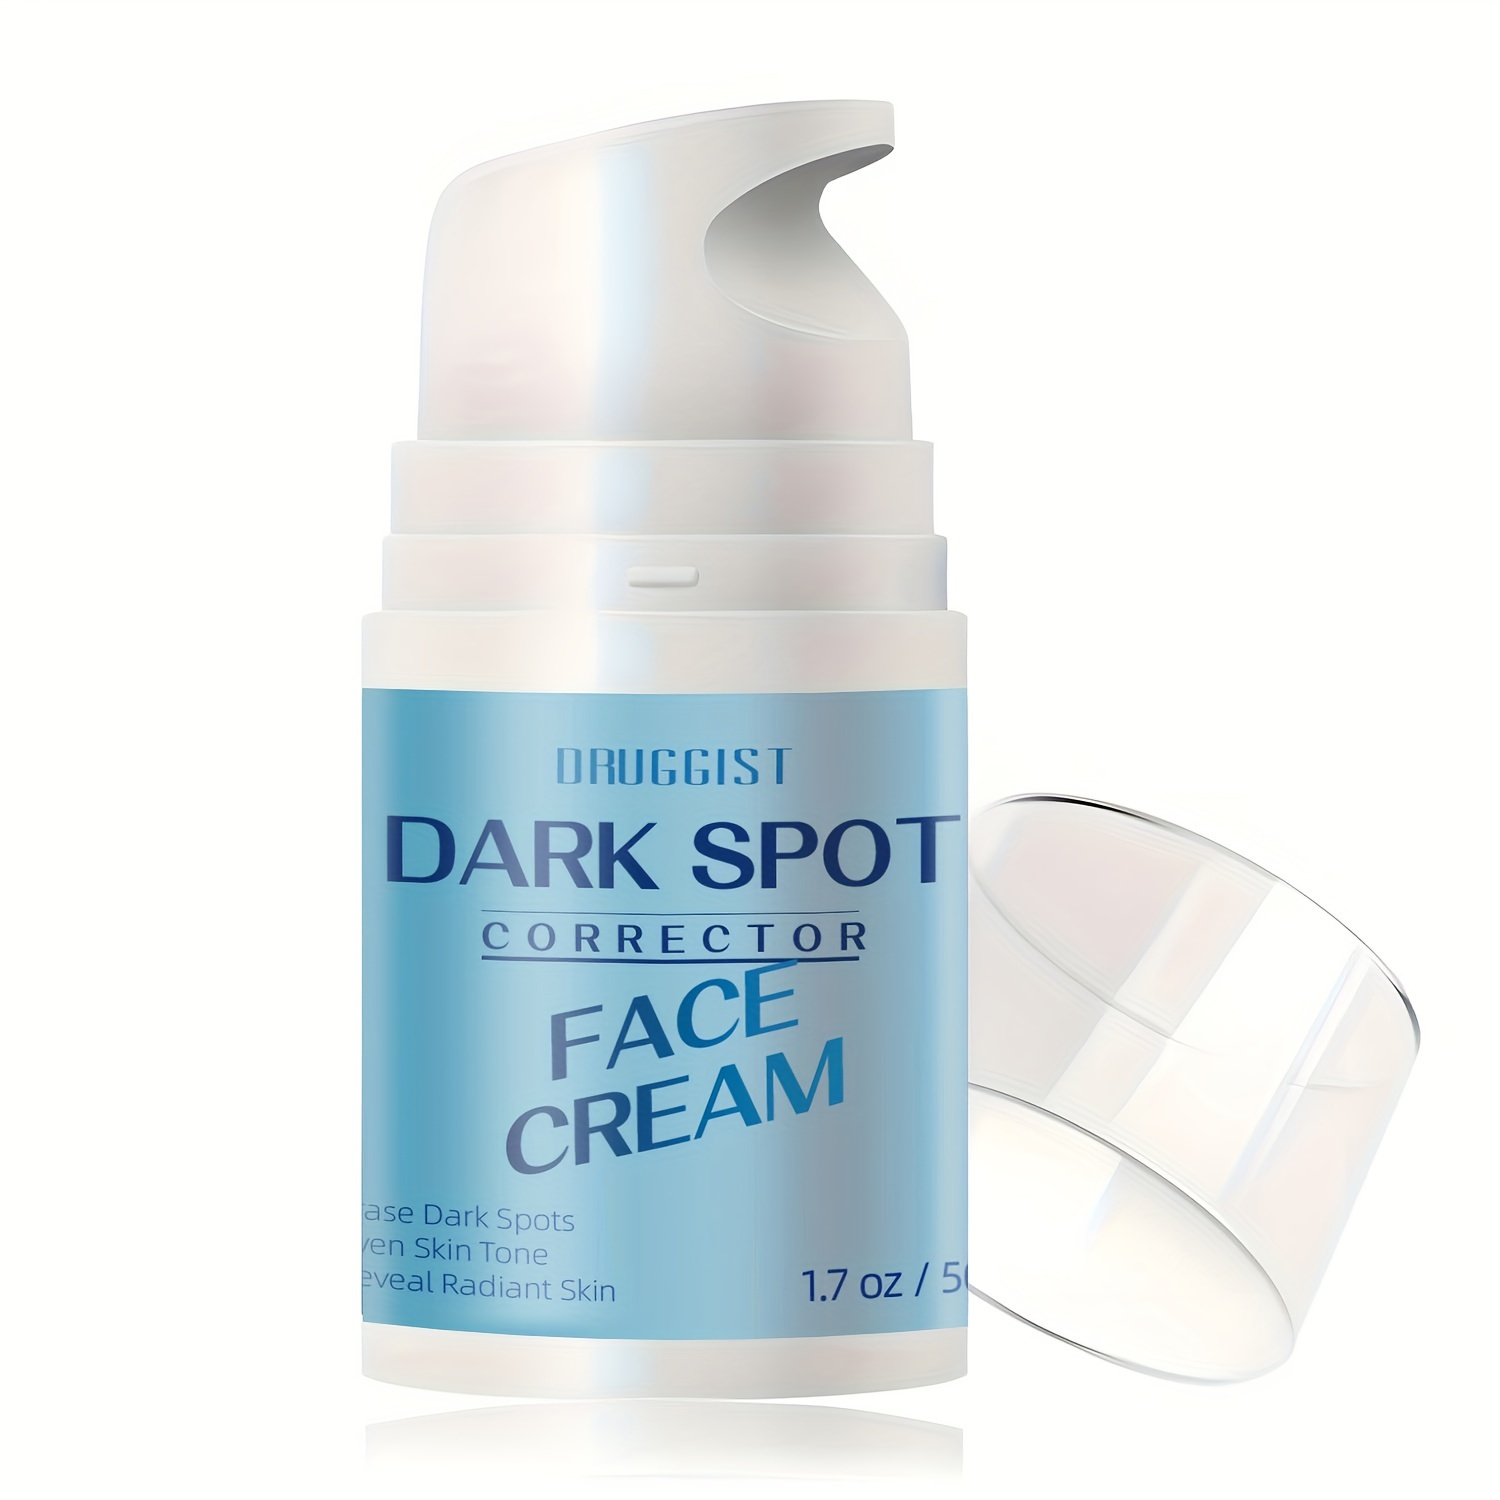  EnaSkin Dark Spot Corrector for Face: Age Spot, Freckle,  Melasma, and Brown Spot Remover for Skin, Hands, Lips, Arms, and Legs -  With Vitamin C - 1.7 Fl Oz : Beauty